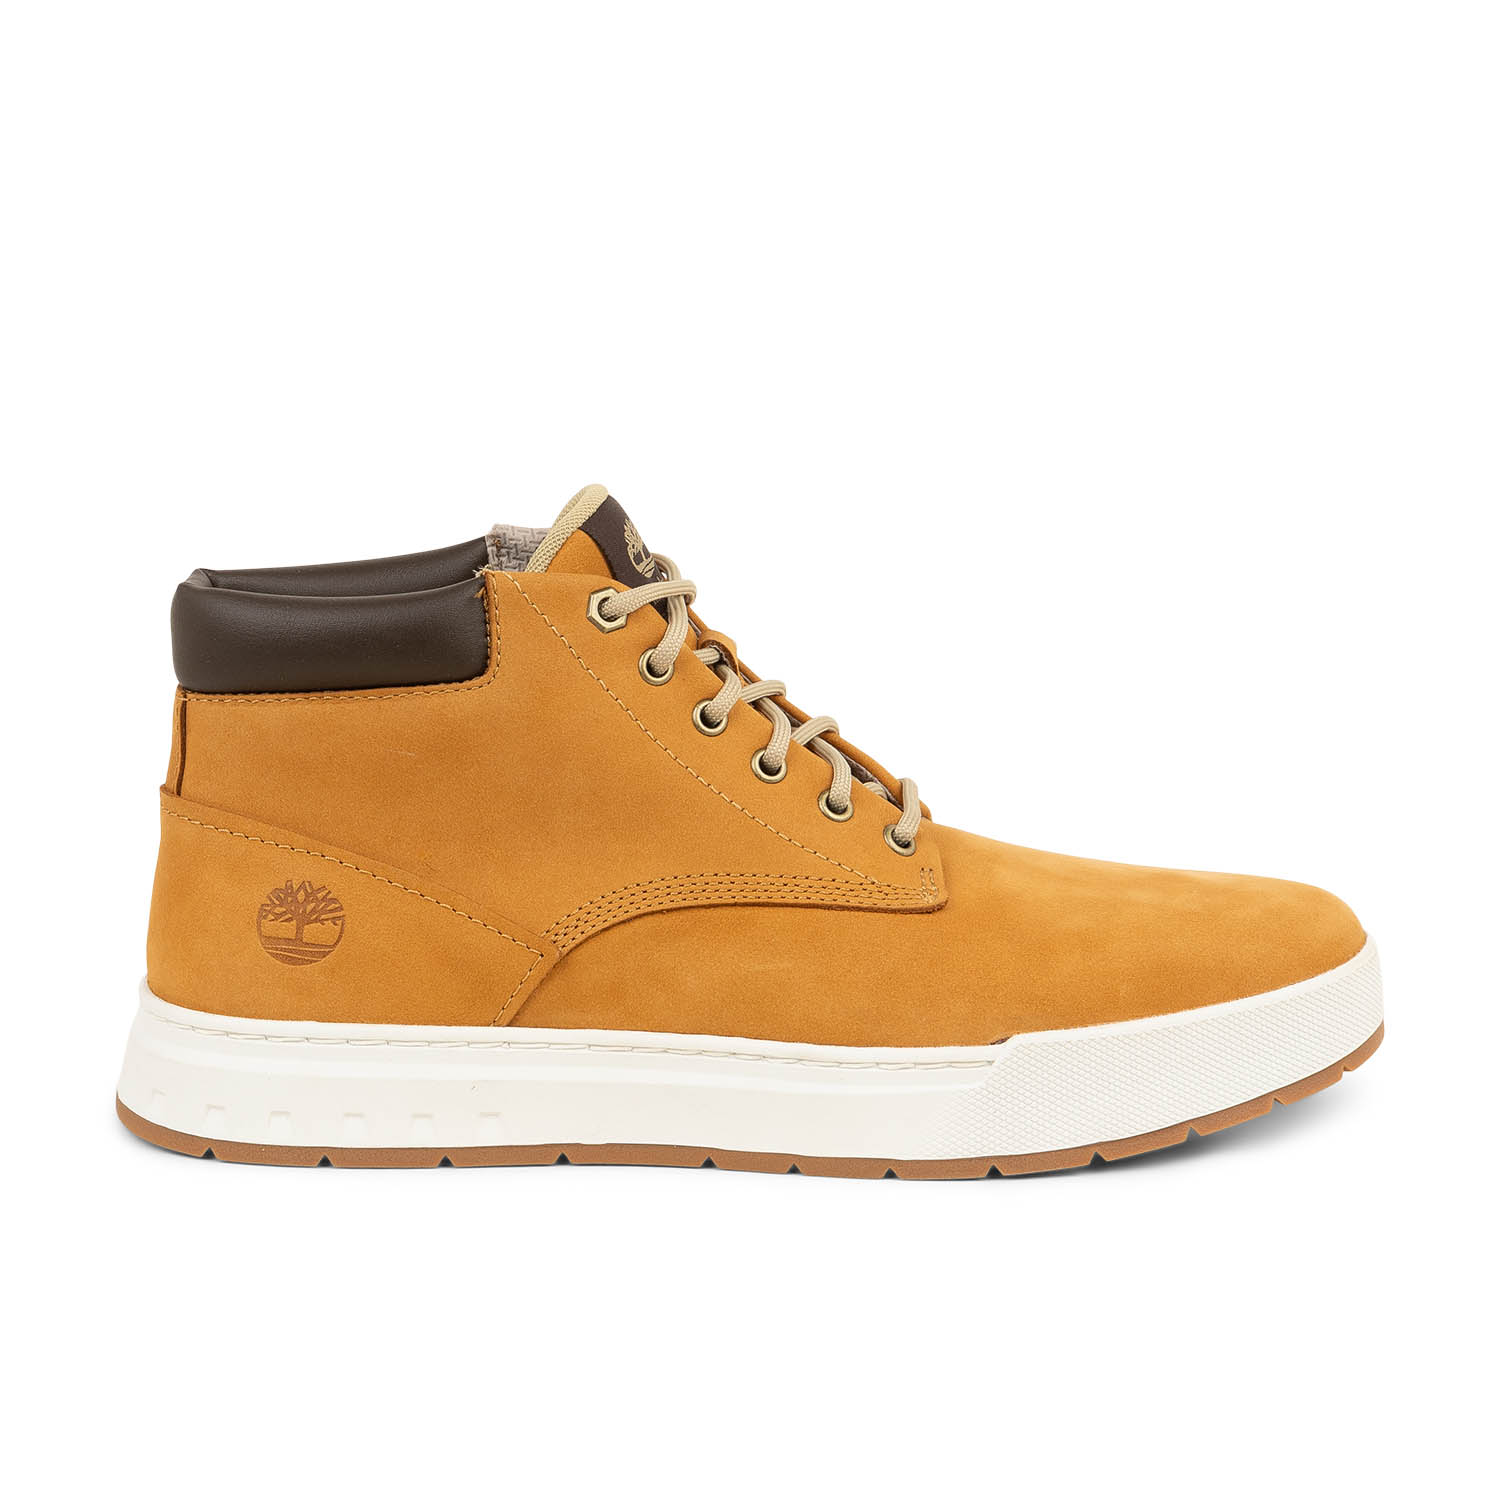 01 - MAPLE GROVE - TIMBERLAND - Chaussures à lacets - Nubuck